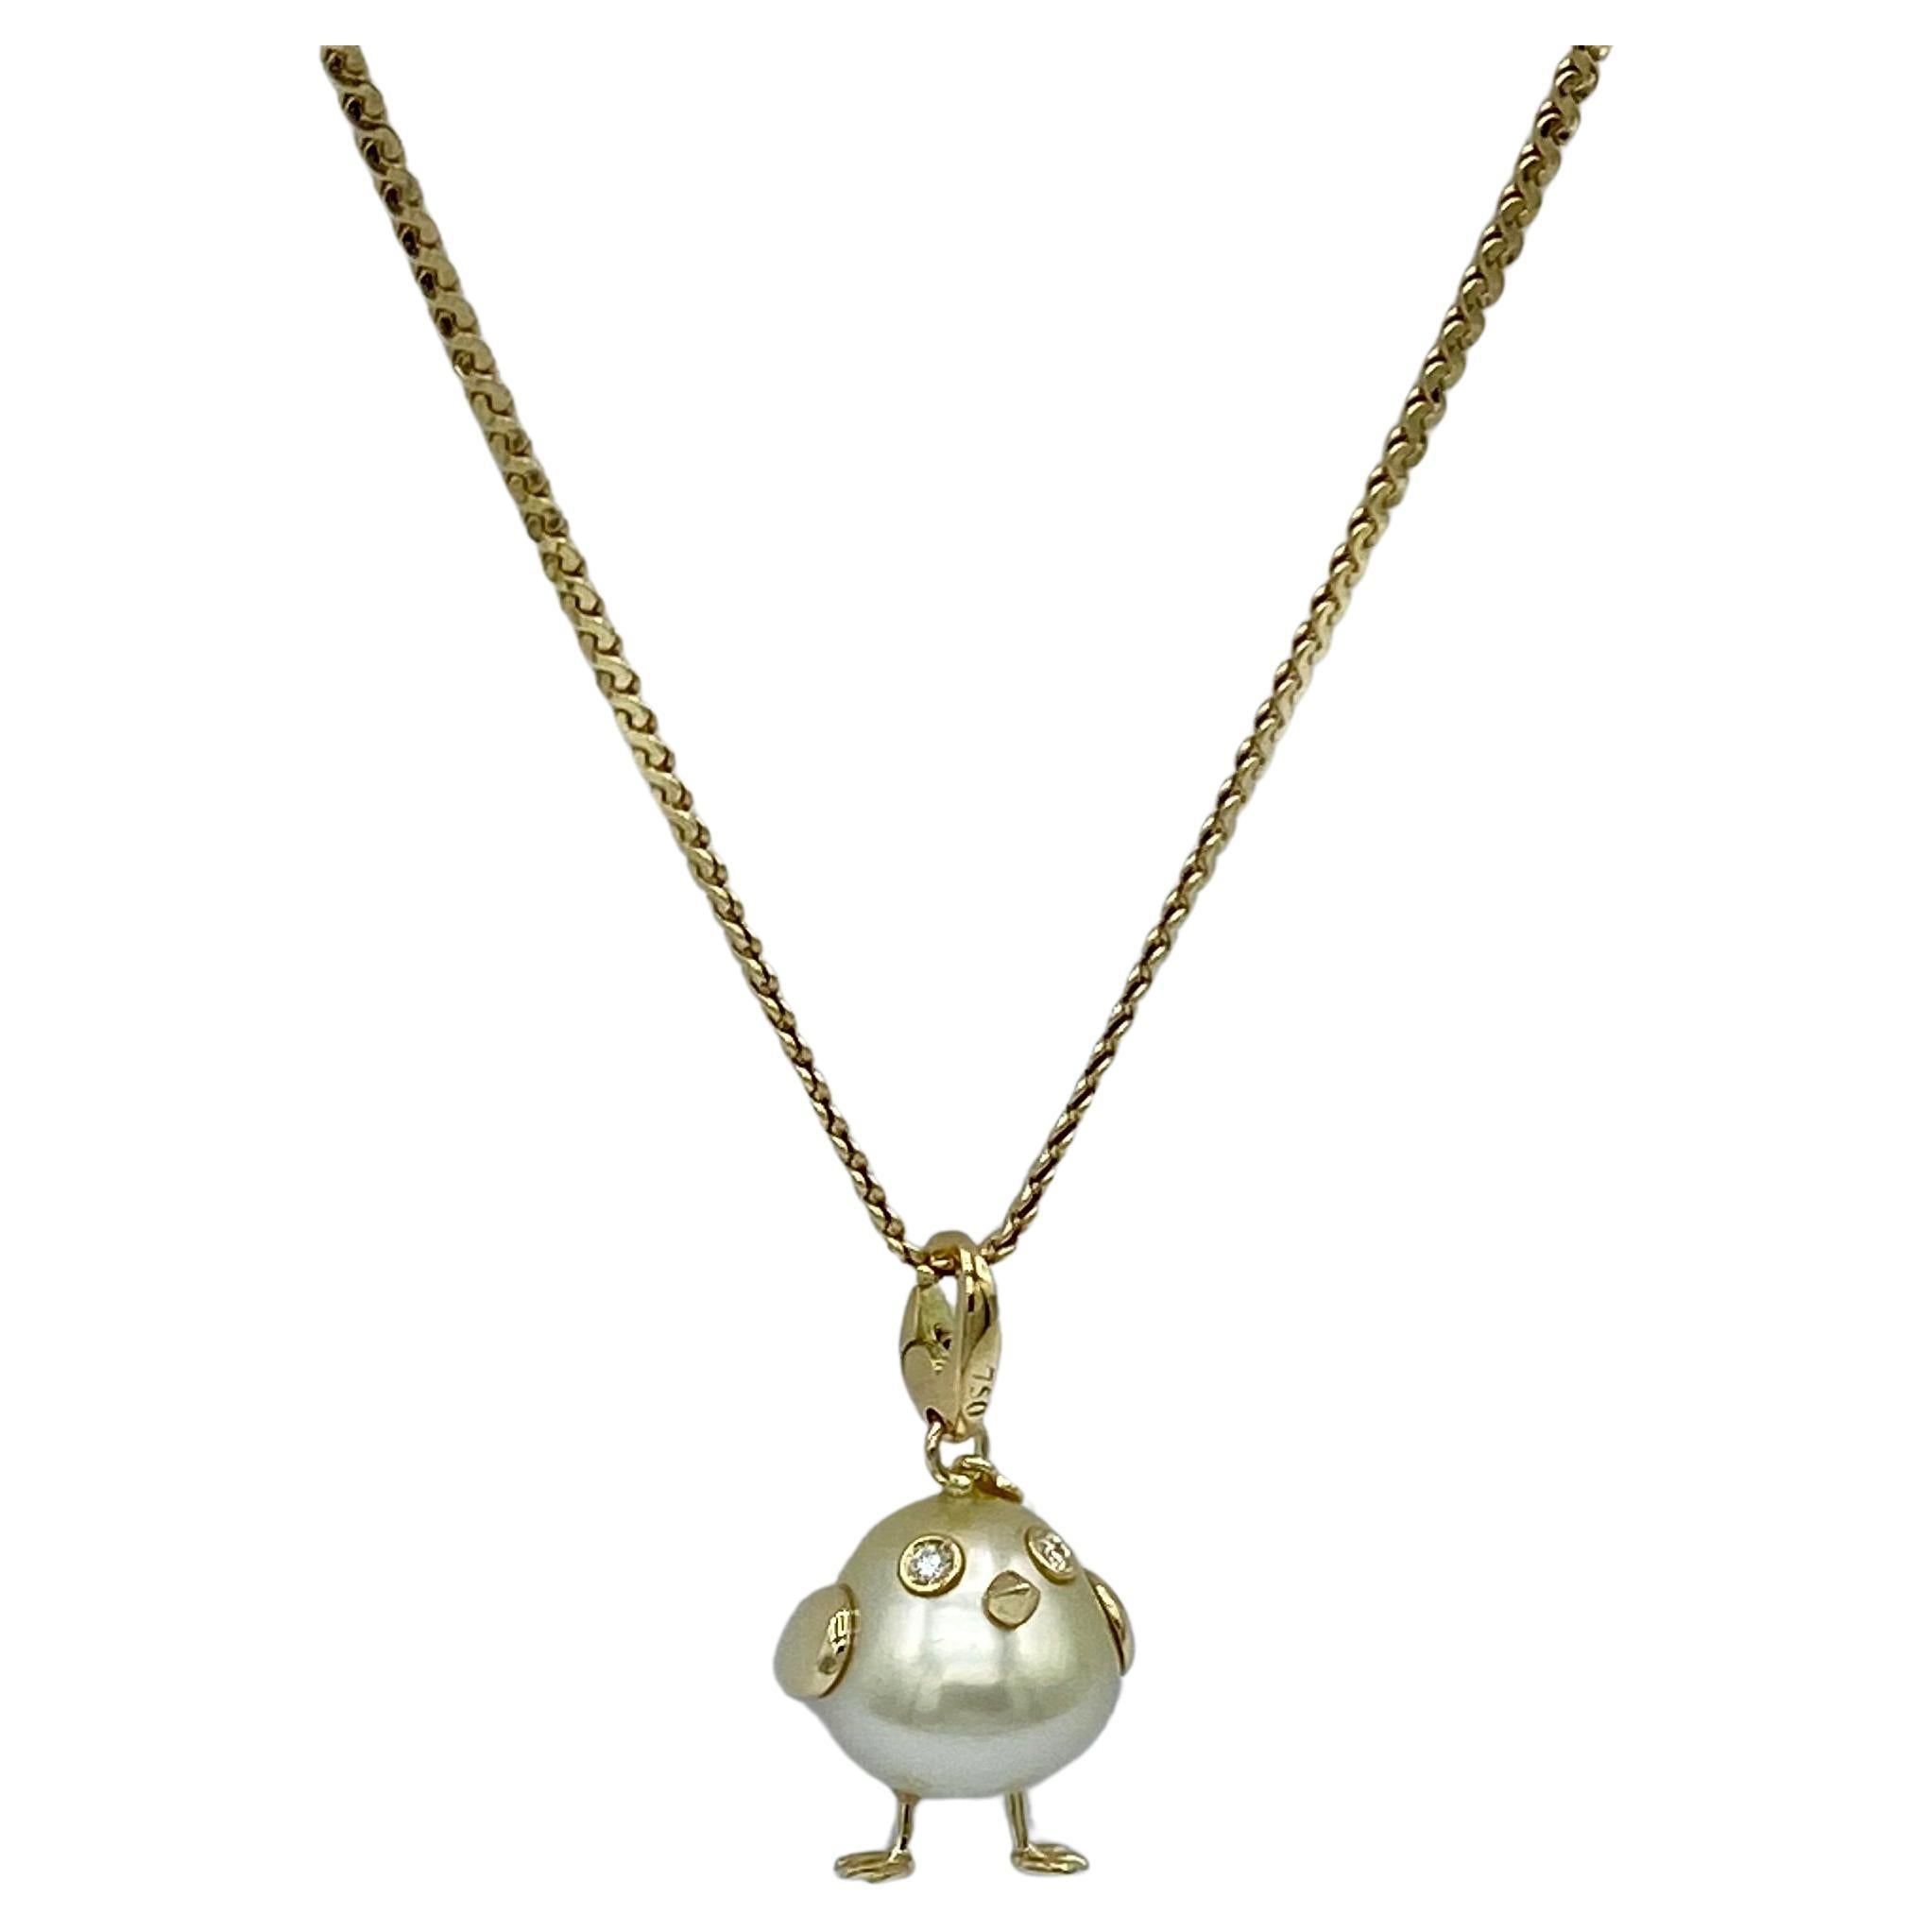 18Kt Gold Pearl and White Diamonds Bird Pendant / Charm Made in Italy
With a beautiful cultured gold pearl from the South Seas, I made a bird pendant because of its somewhat oval shape.
It has a delicate natural yellow coloring and is 13.5 x 13.2